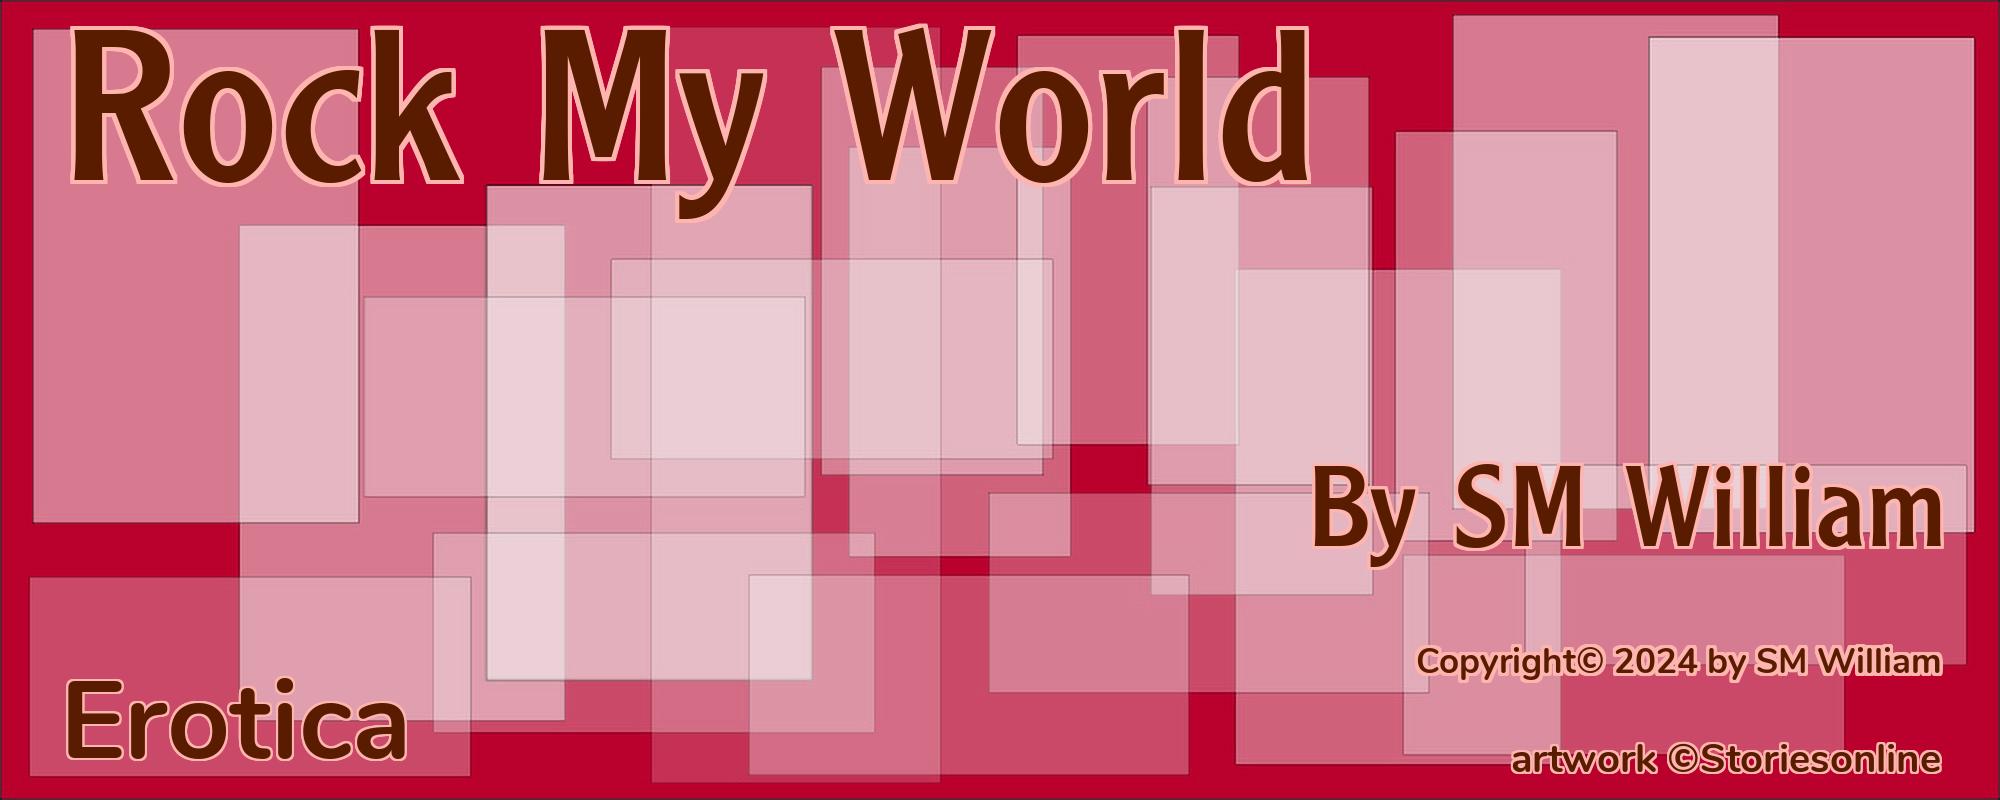 Rock My World - Cover